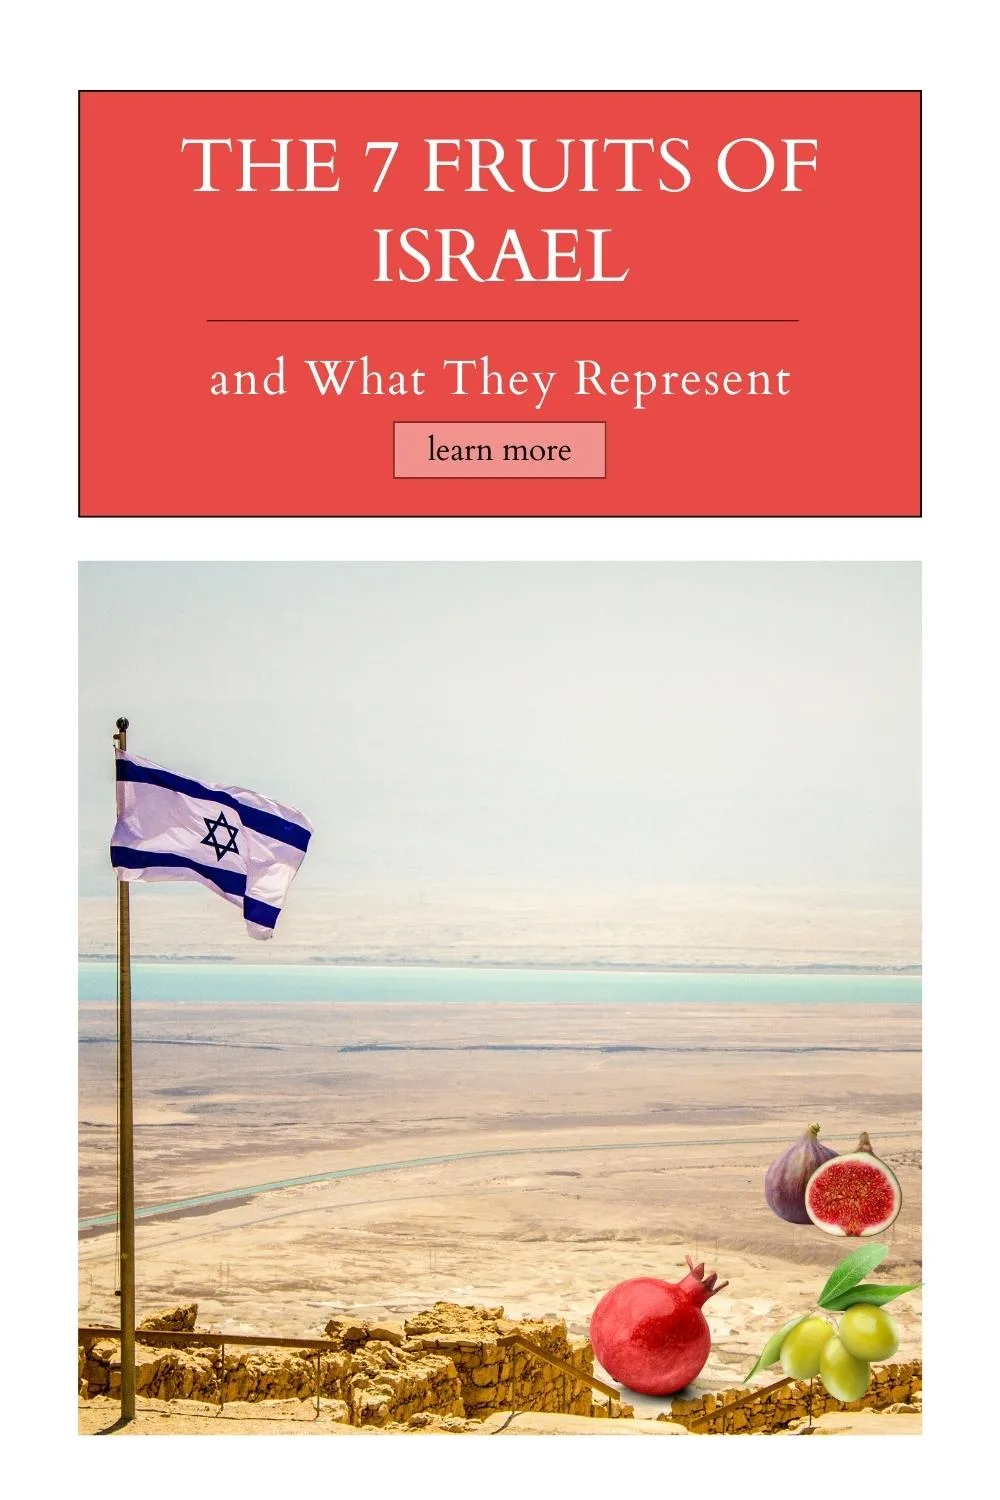 image of dead sea with Israeli flag with the text Encounter the 7 fruits of Israel and What They Represent